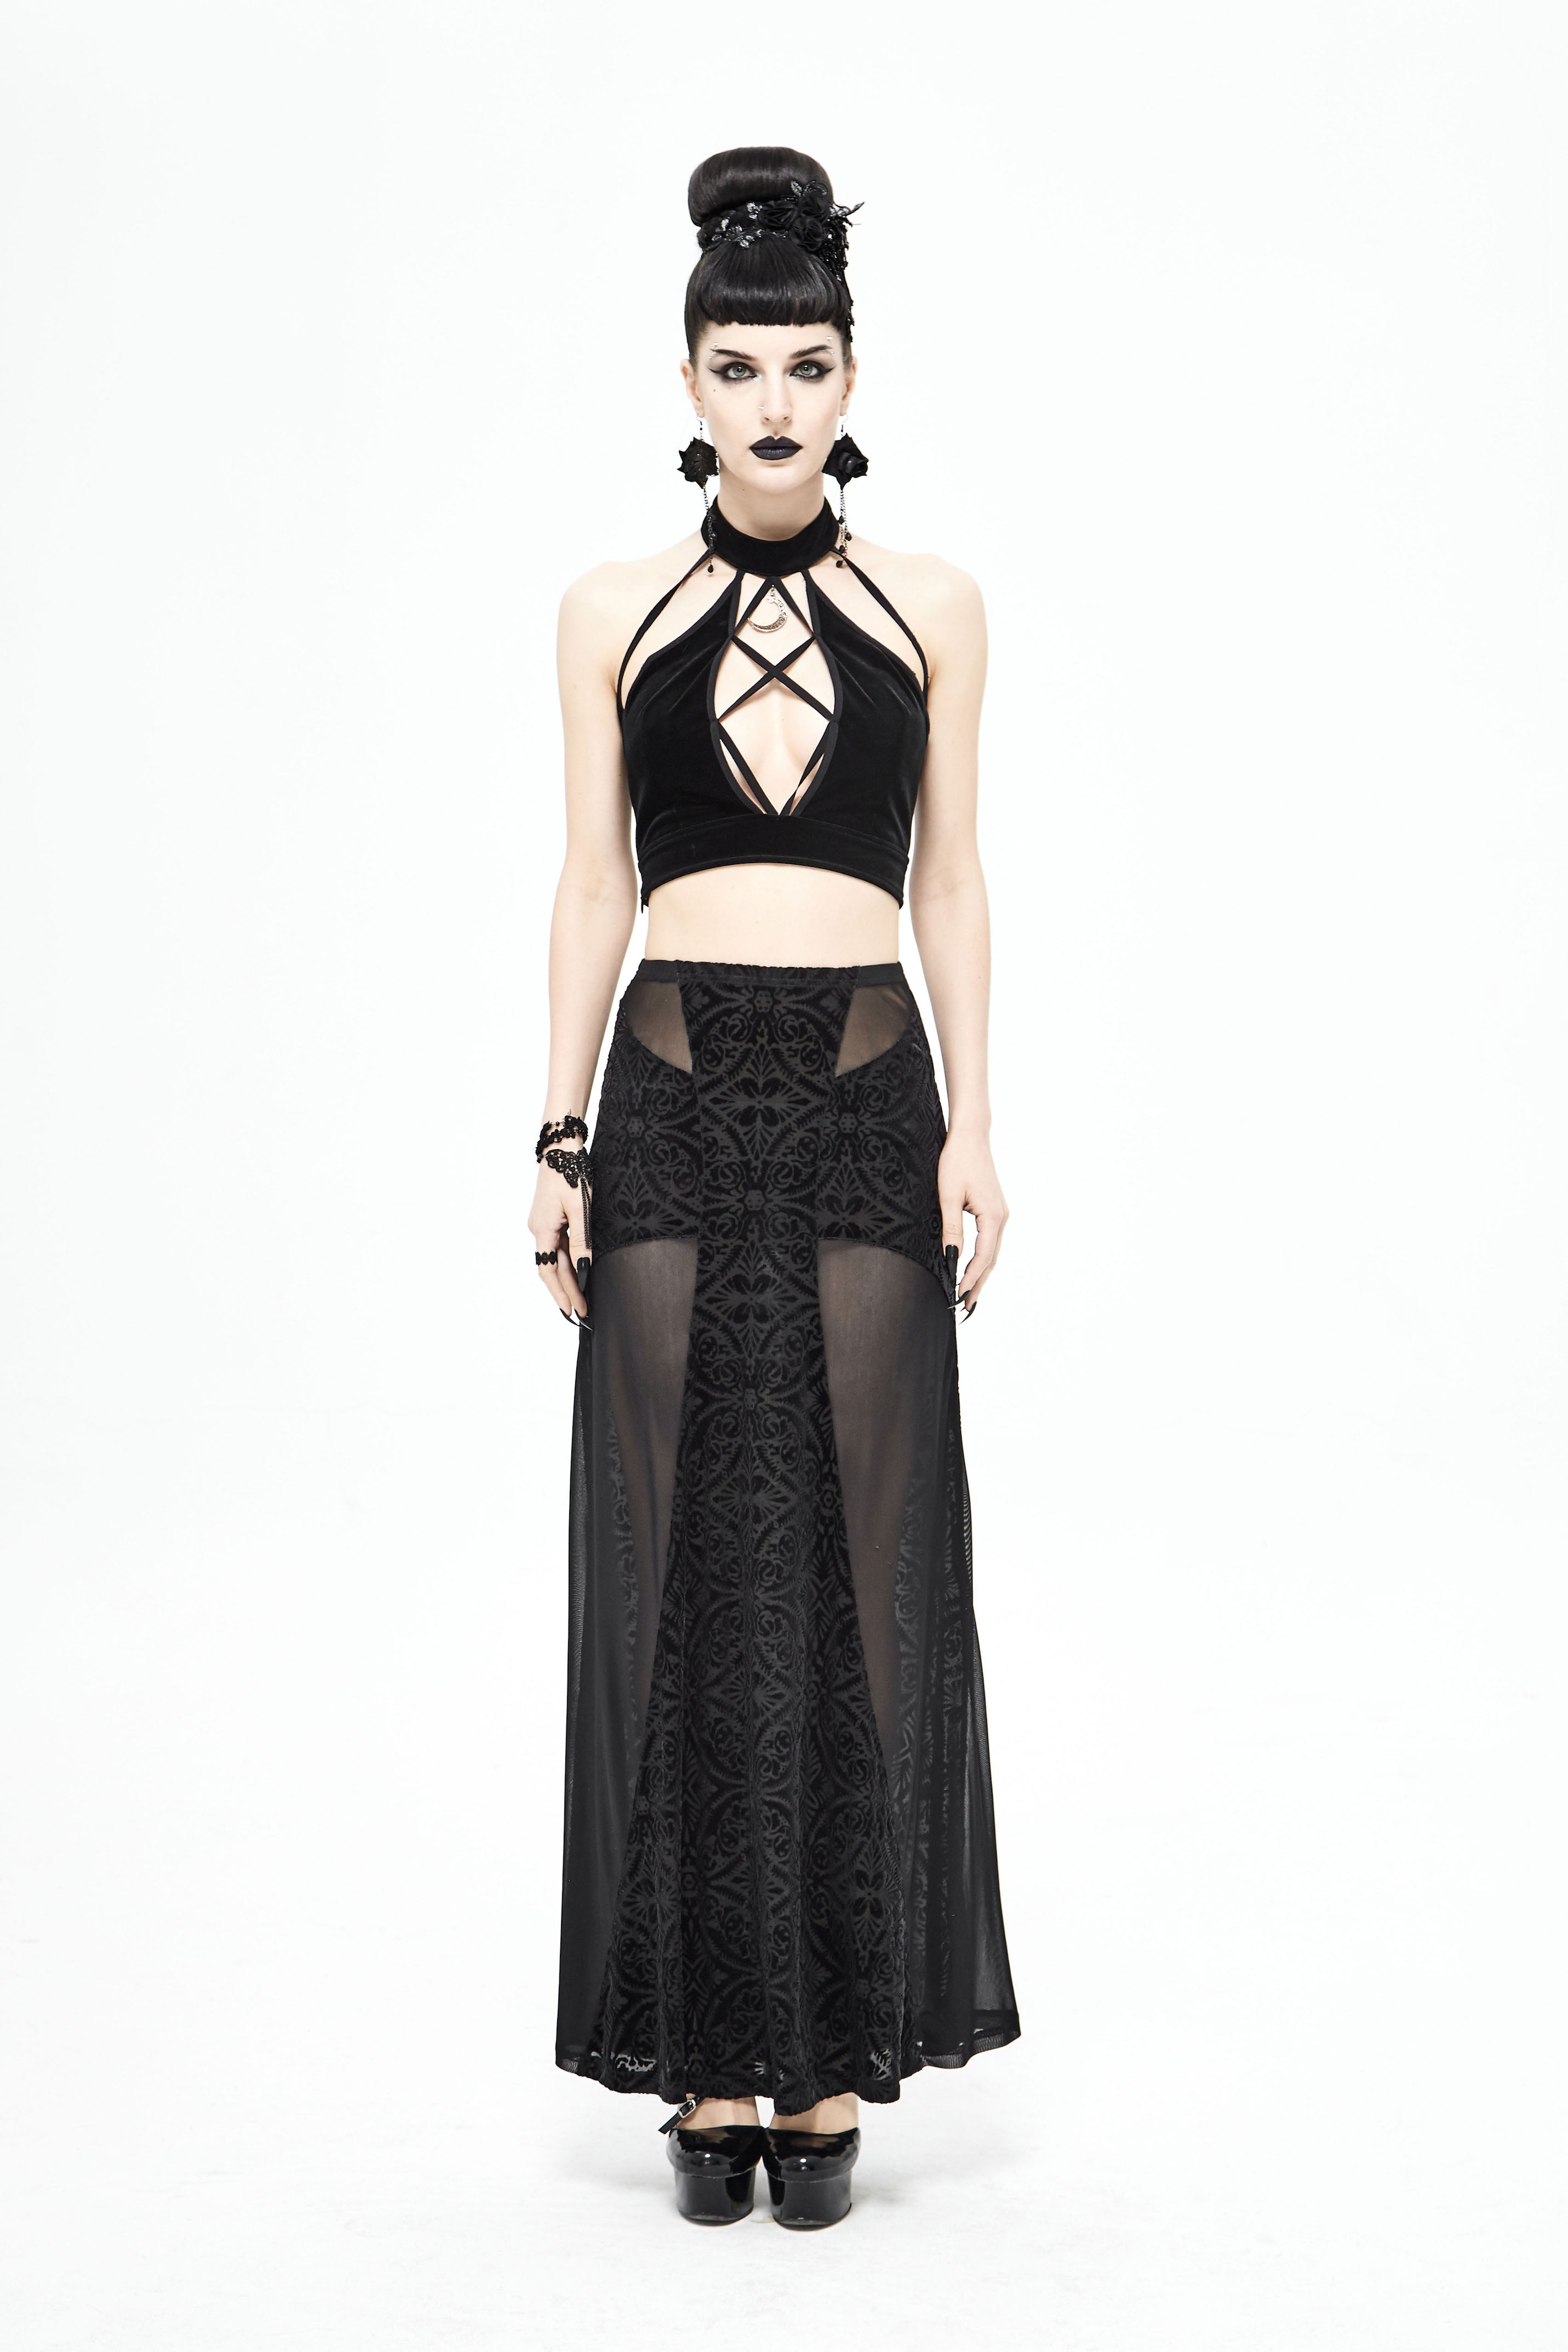 The Isis Maxi Skirt - Goth Mall